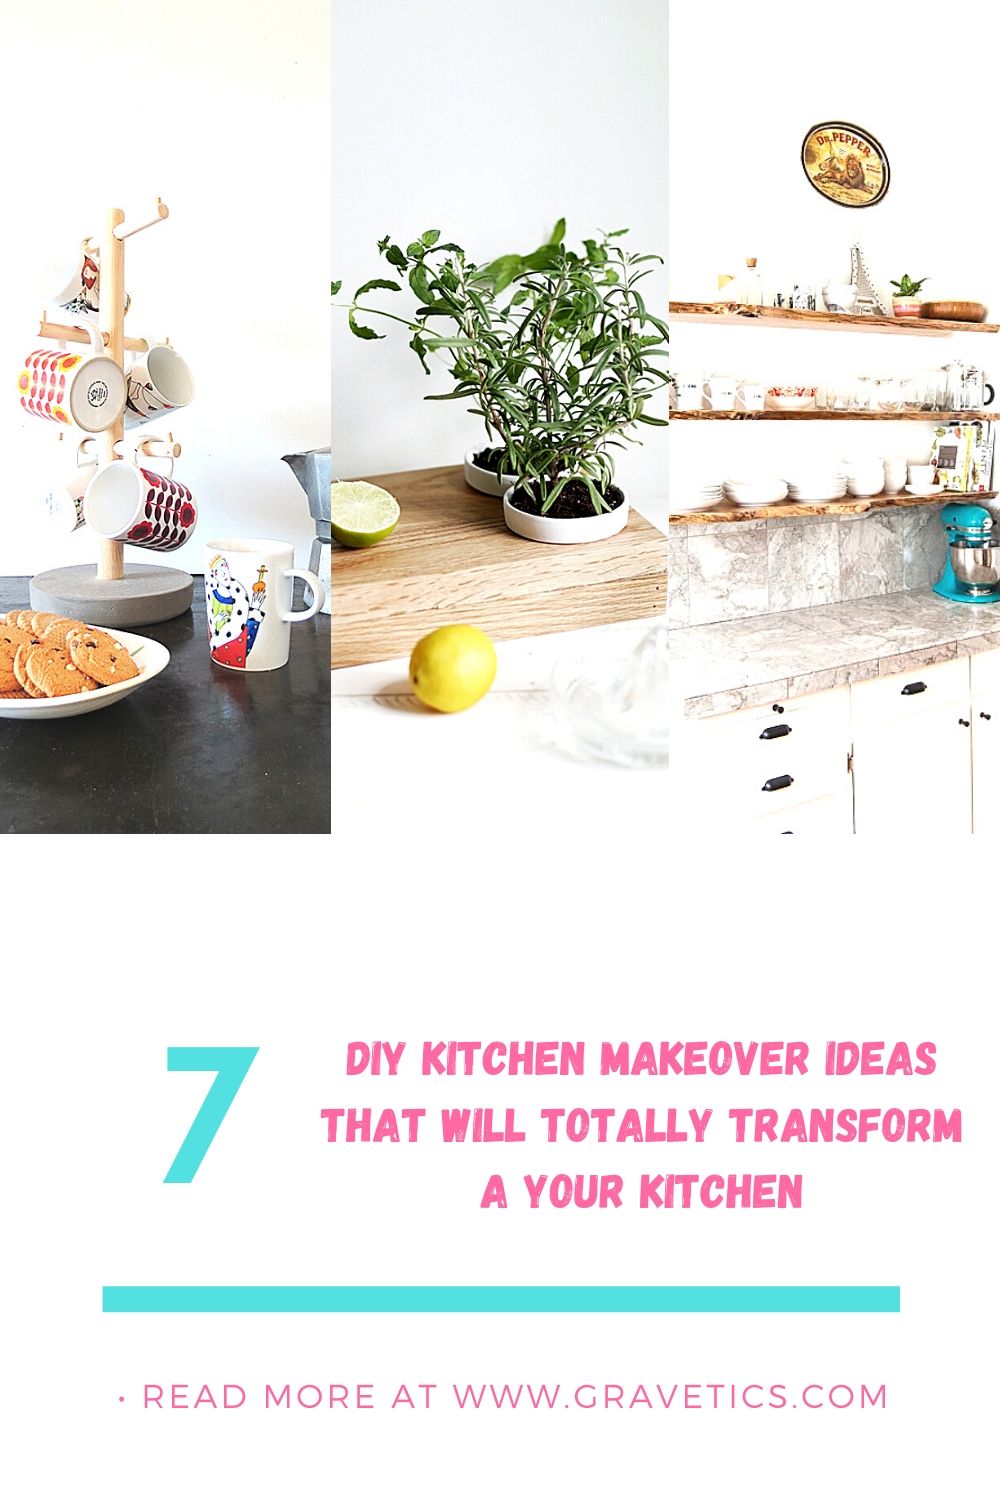 IY Kitchen Makeover Ideas That will Totally Transform a Your Kitchen